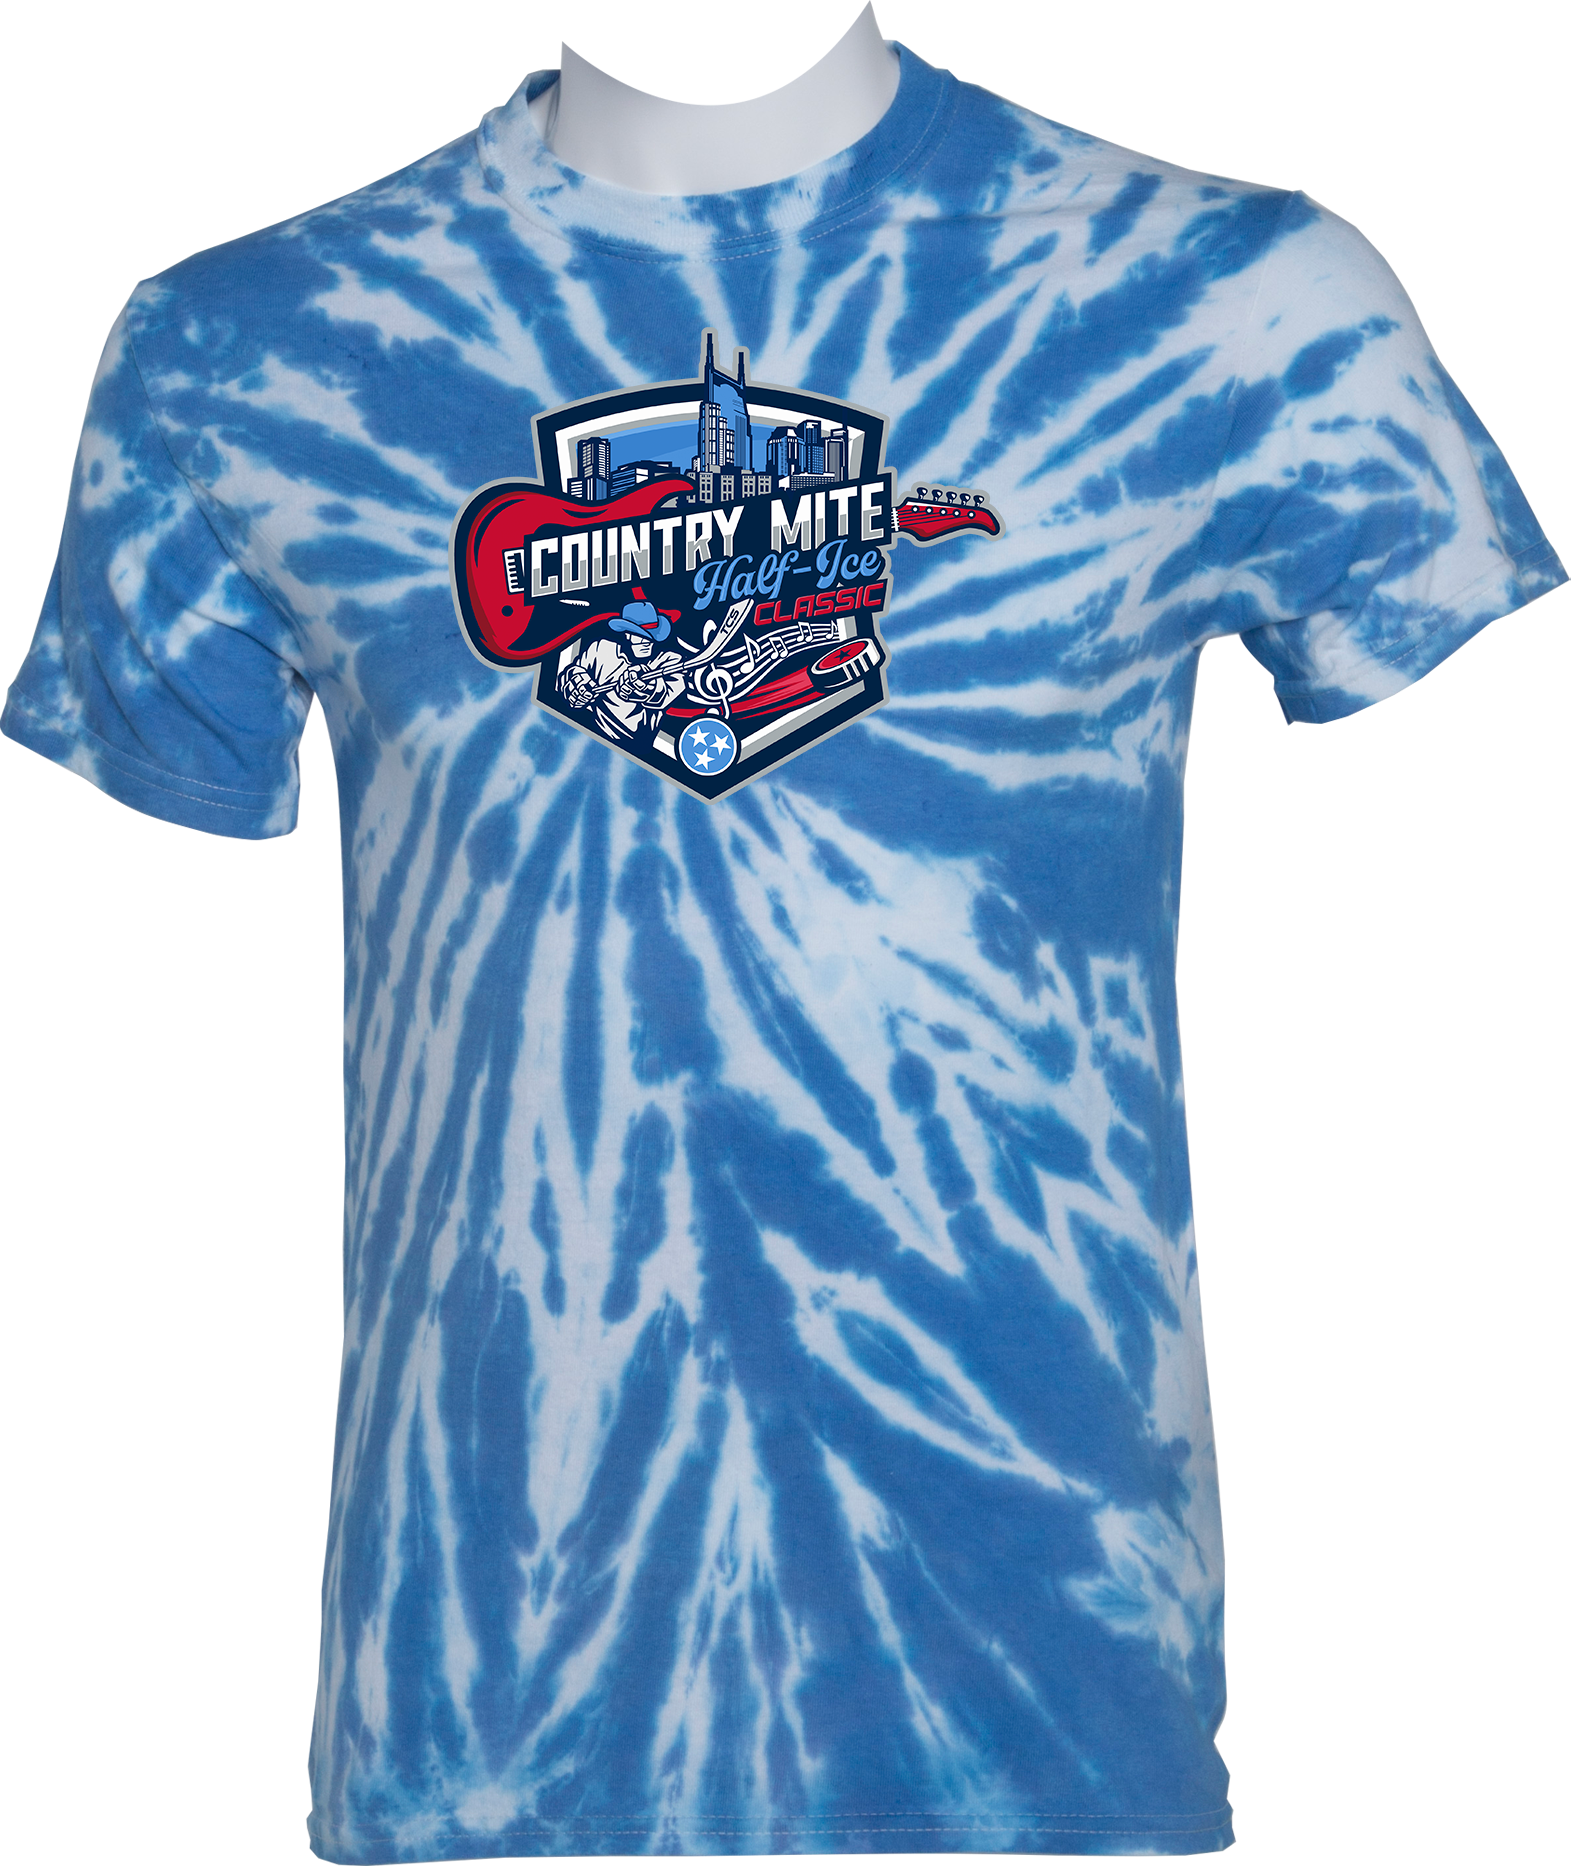 TIE-DYE SHORT SLEEVES - 2023 Country Mite Half-Ice Classic